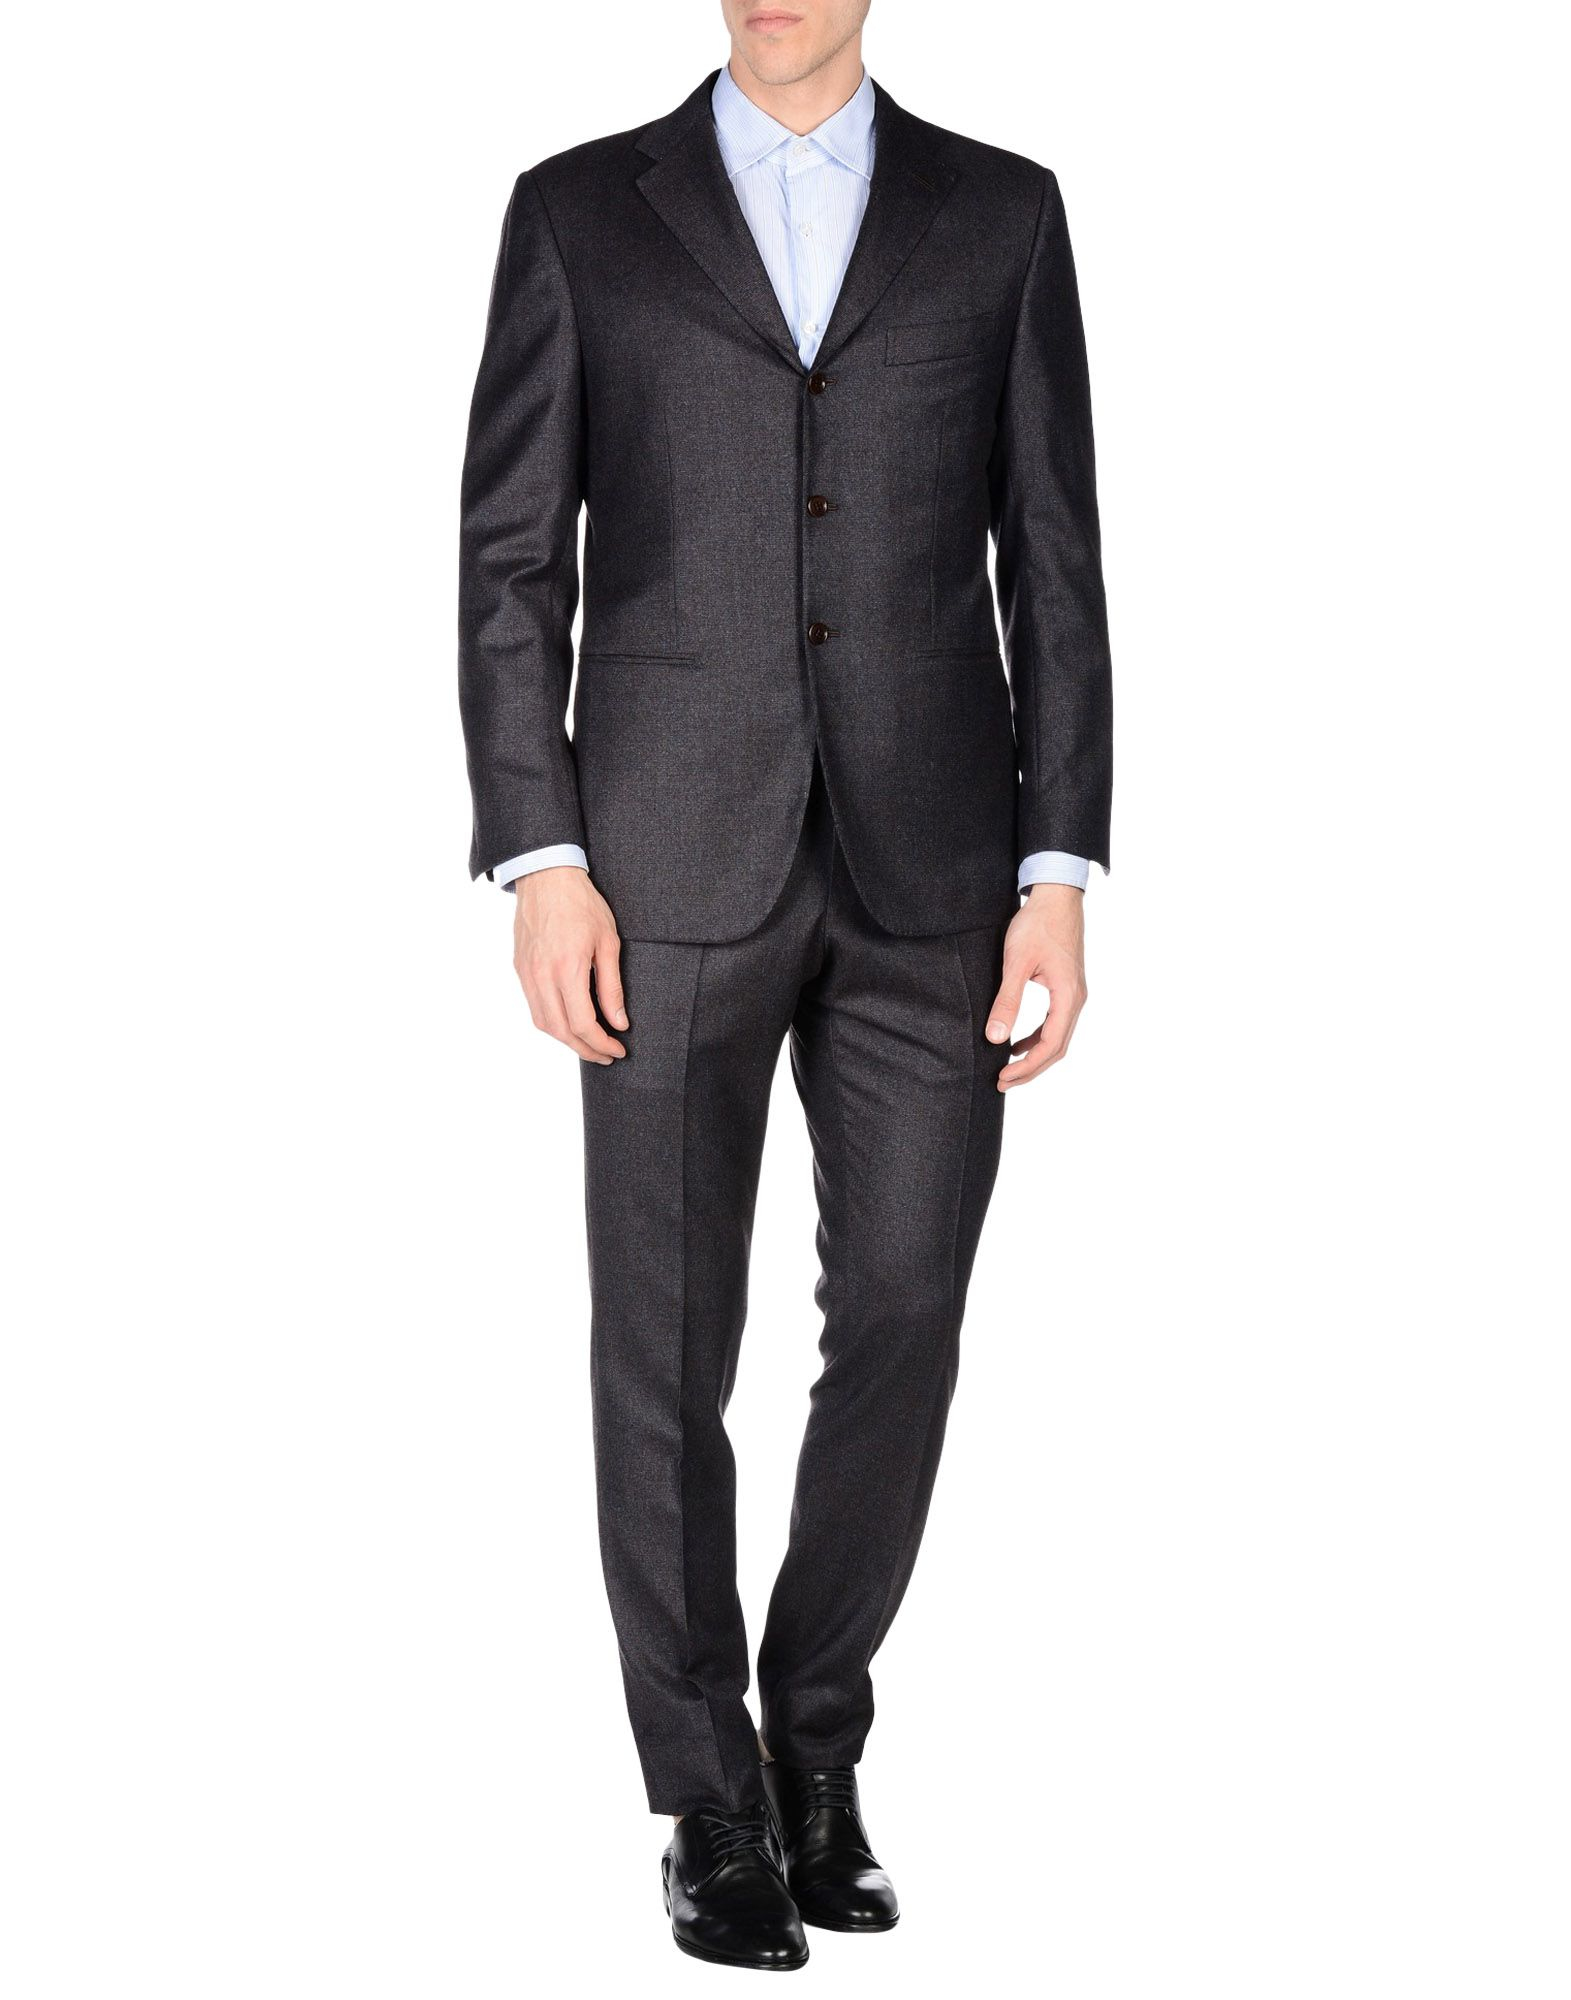 Kiton Suit in Black for Men - Lyst